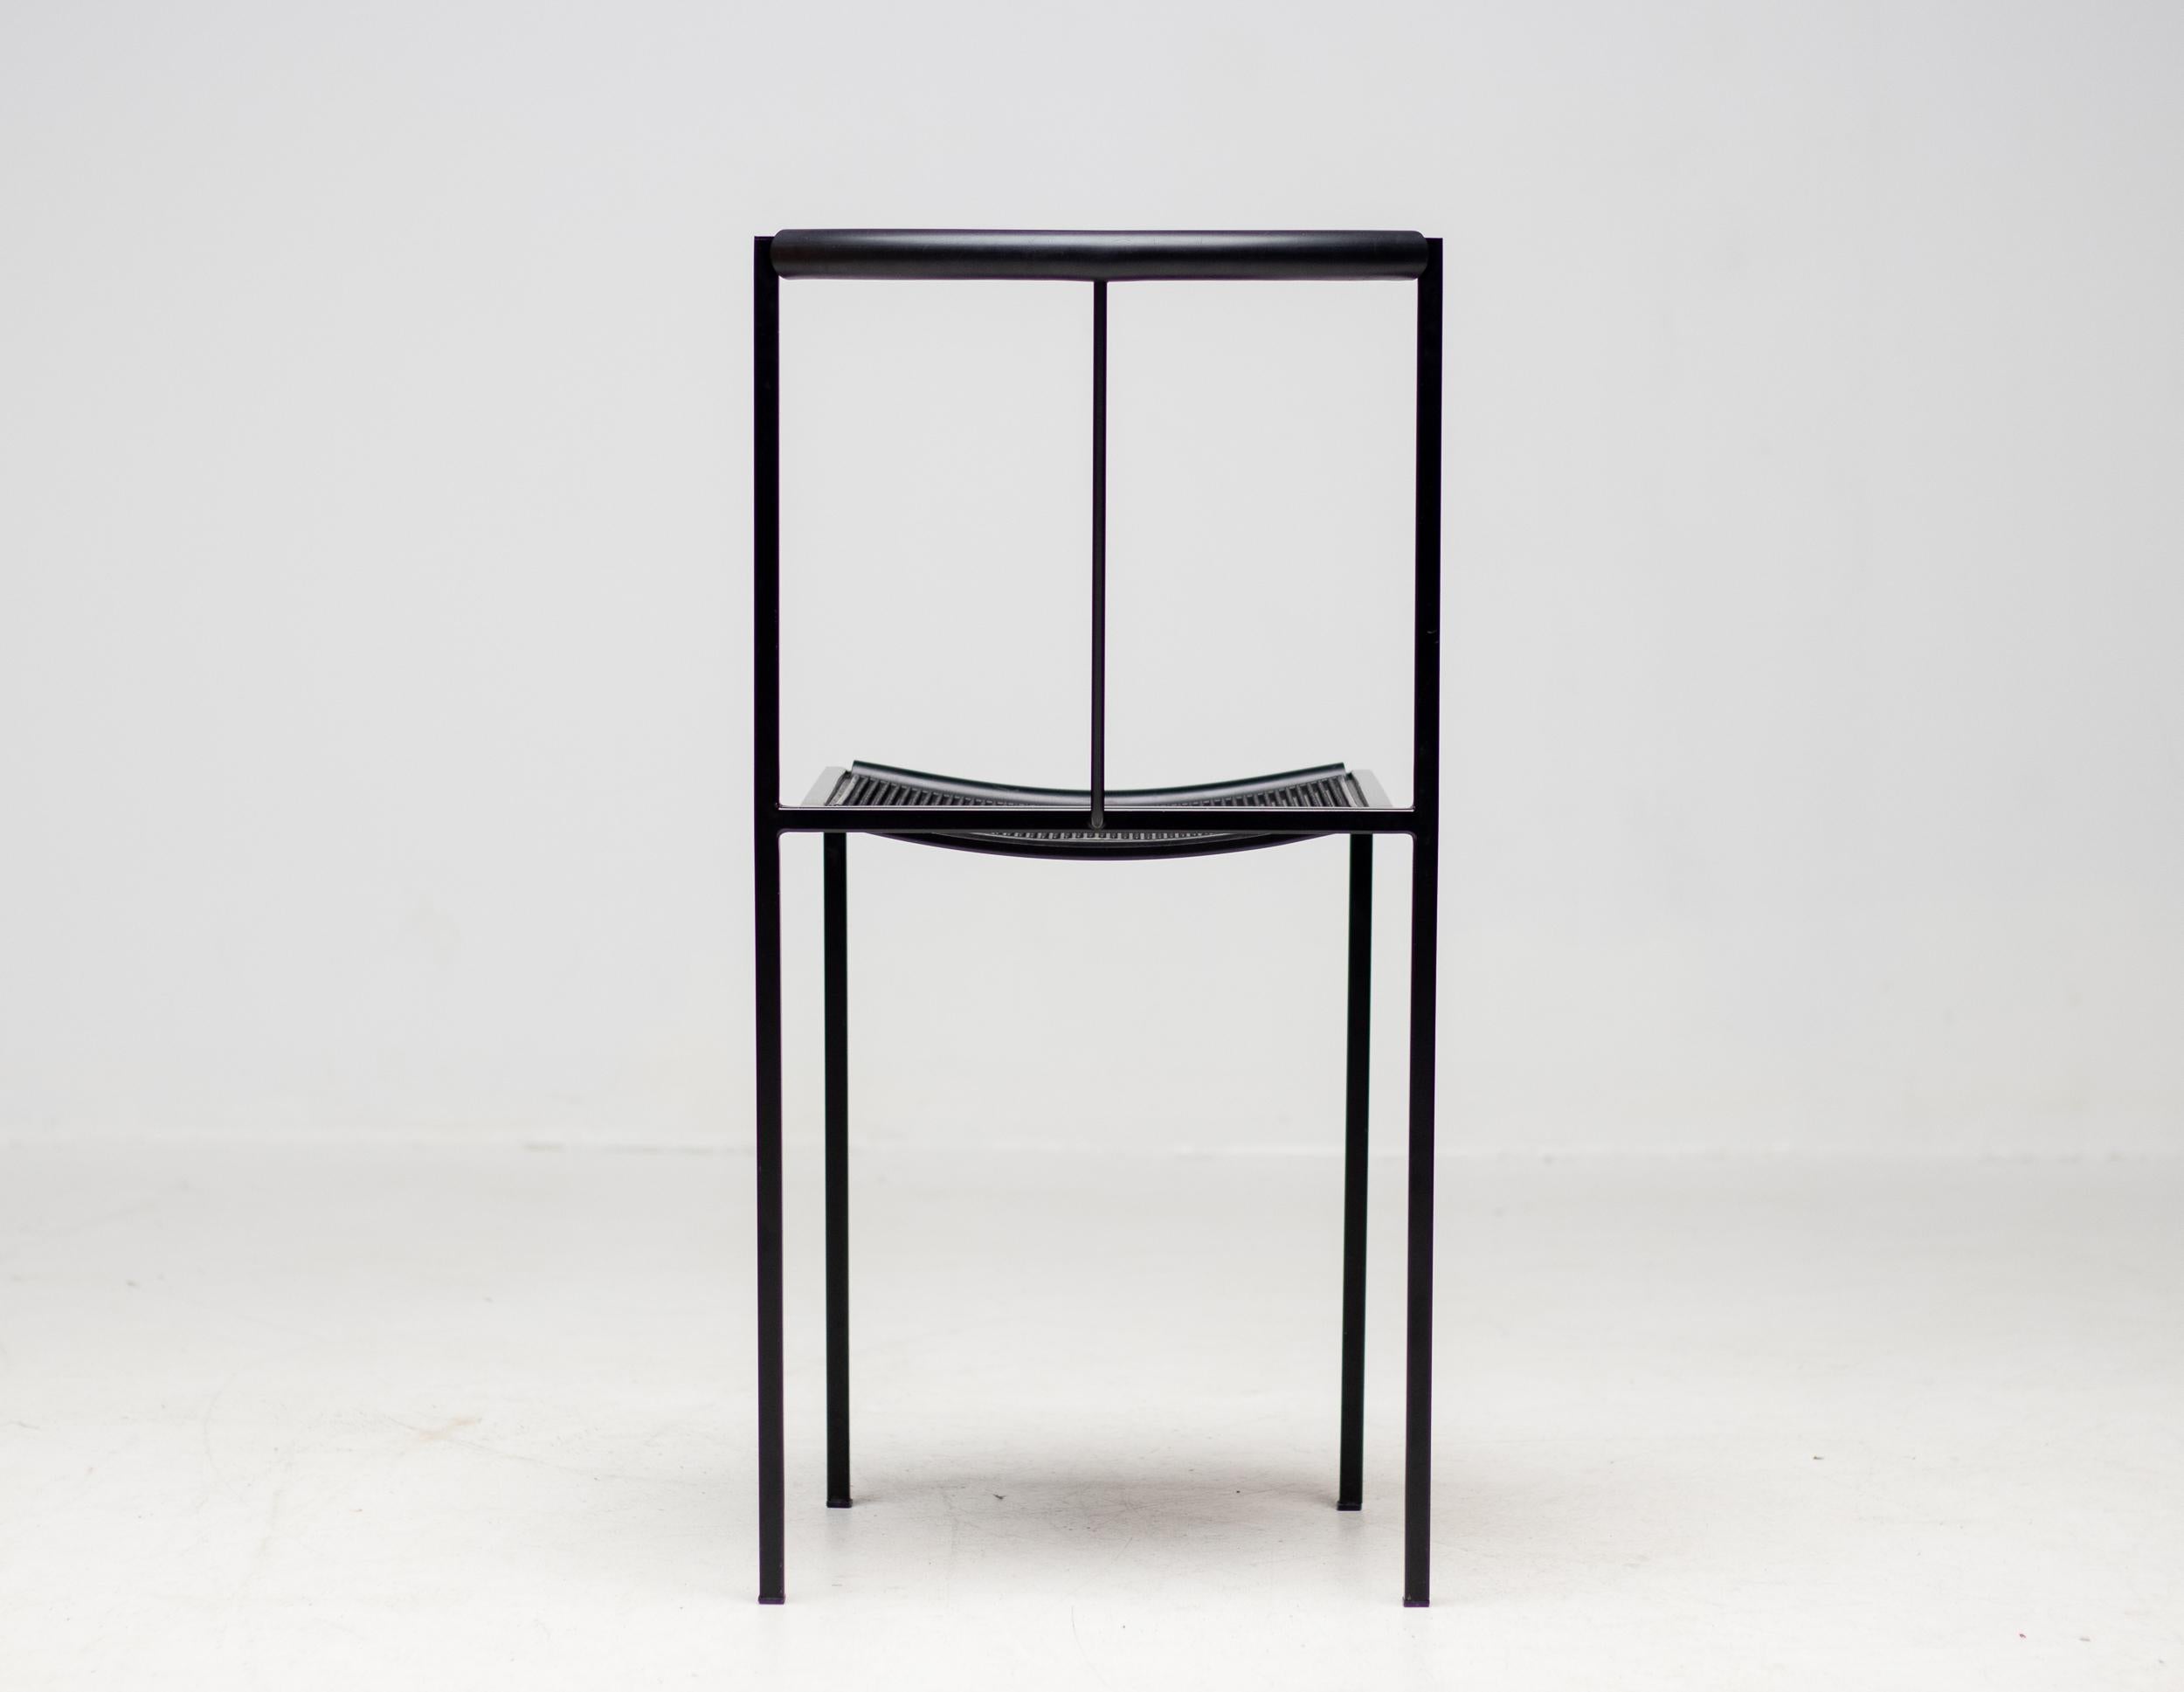 Set of 6 elegant Italian chairs designed by Maurizio Peregalli for Noto Zeus, Milano in 1984.
Square powder-coated steel tube, seat and backrest in molded Polyurethane.
Marked.
Priced as a set of 6.
      